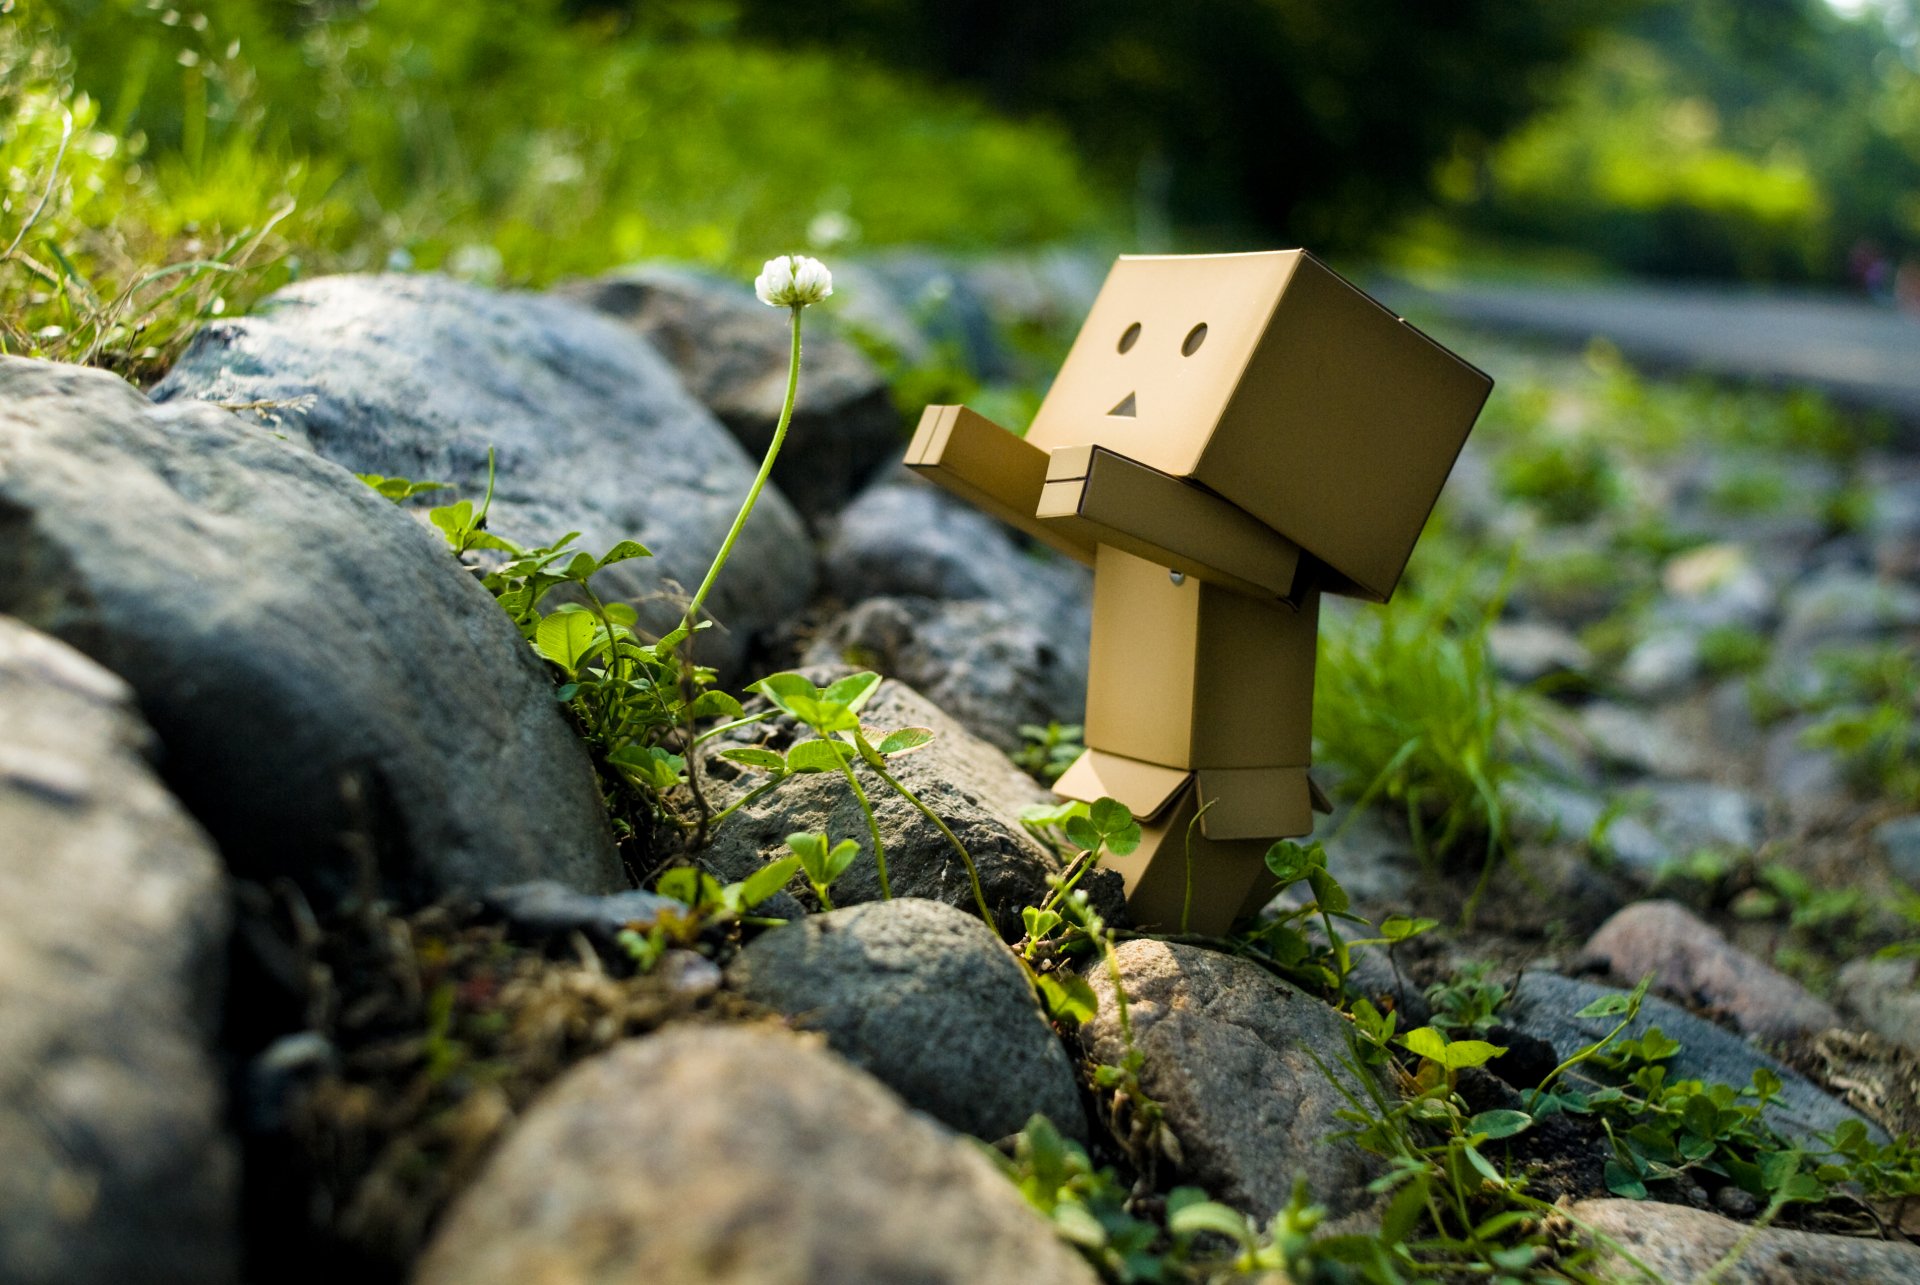 96 Danbo HD Wallpapers Backgrounds Wallpaper Abyss